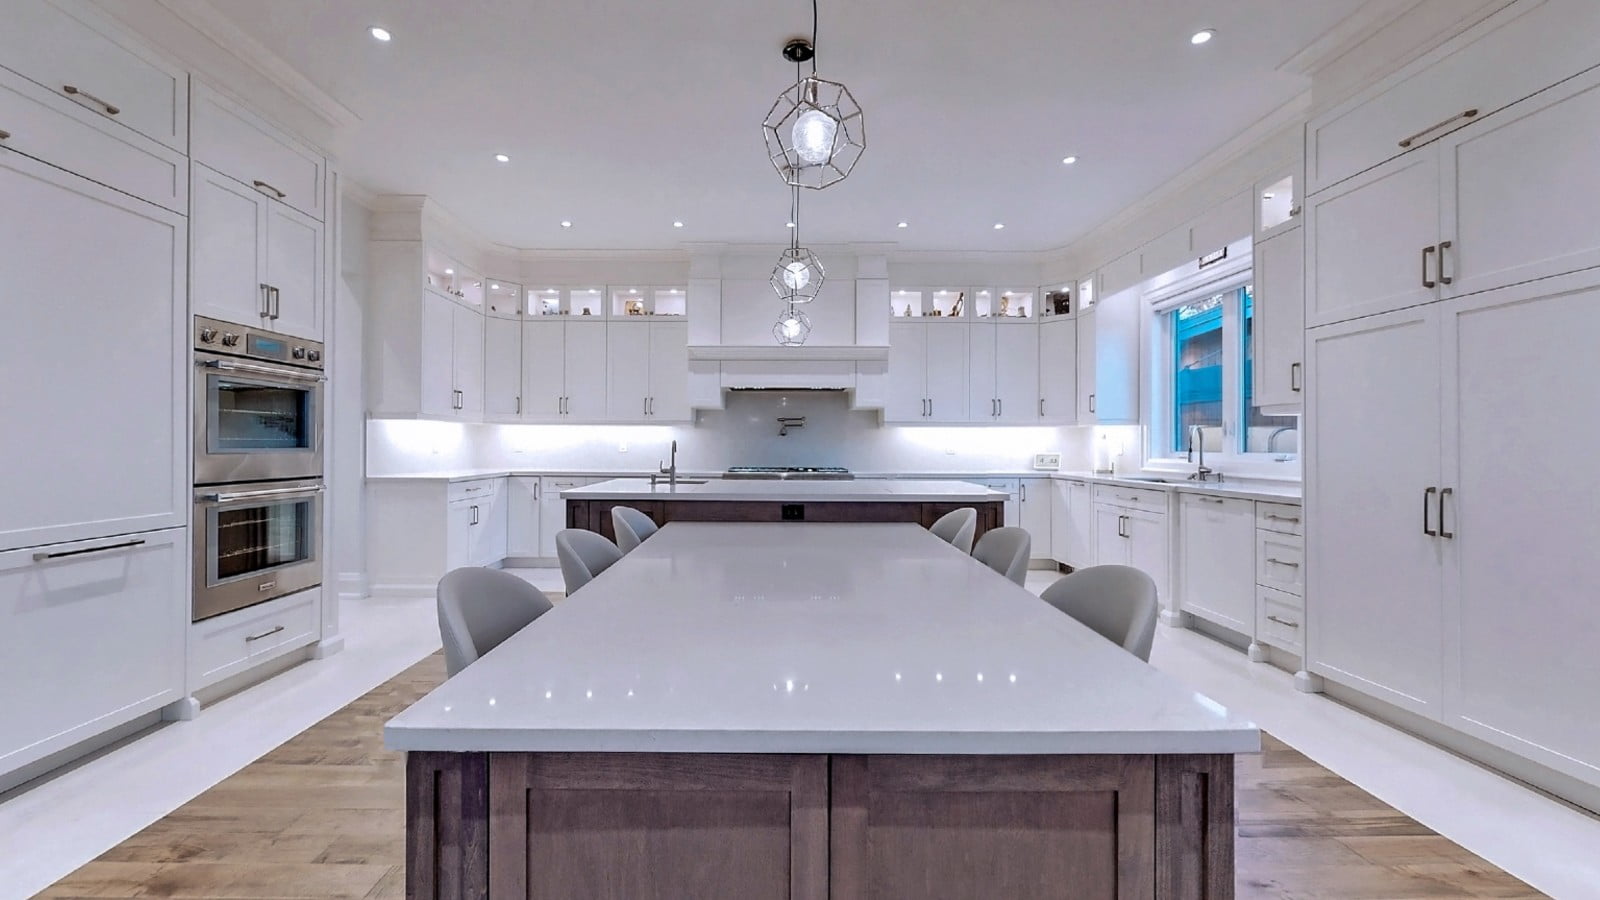 Toronto Cabinets| Transitional Whole House Cabinetry Remodel